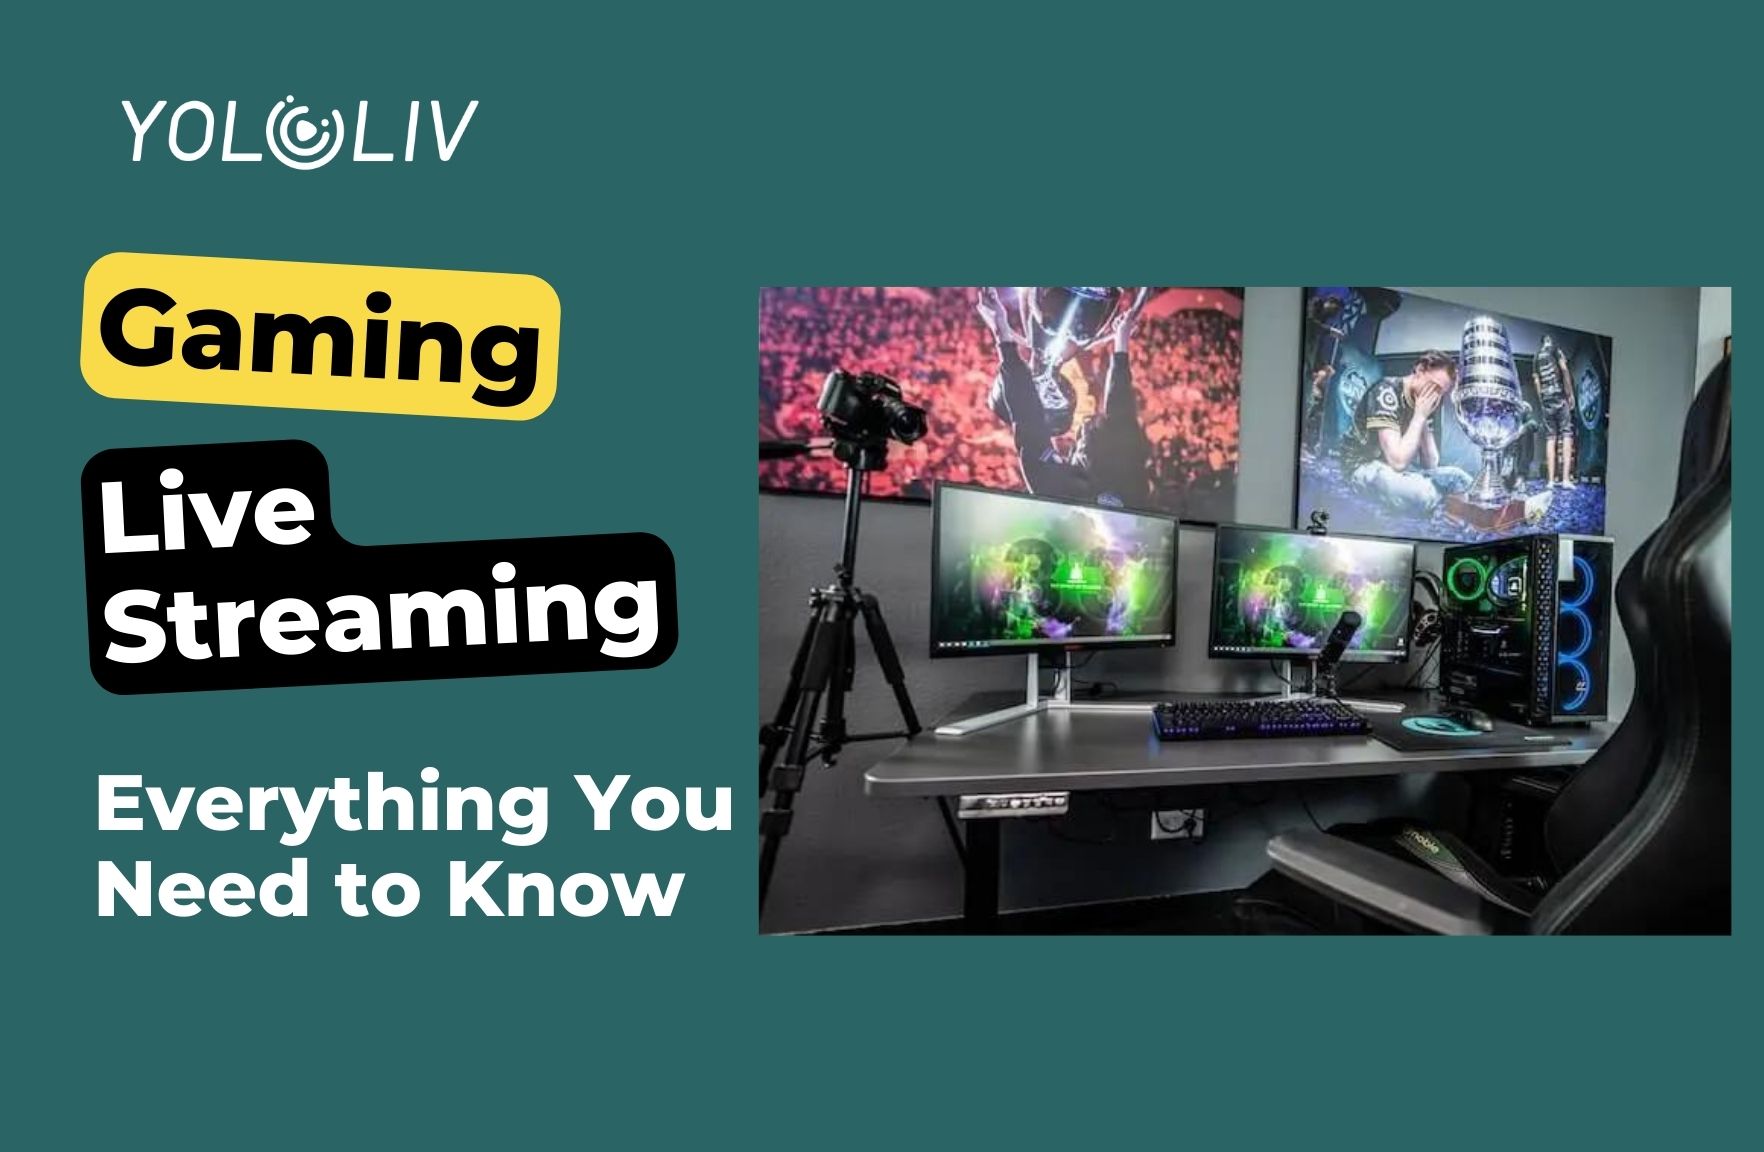 Ultimate guide to Twitch: The tips, tricks and gear you need